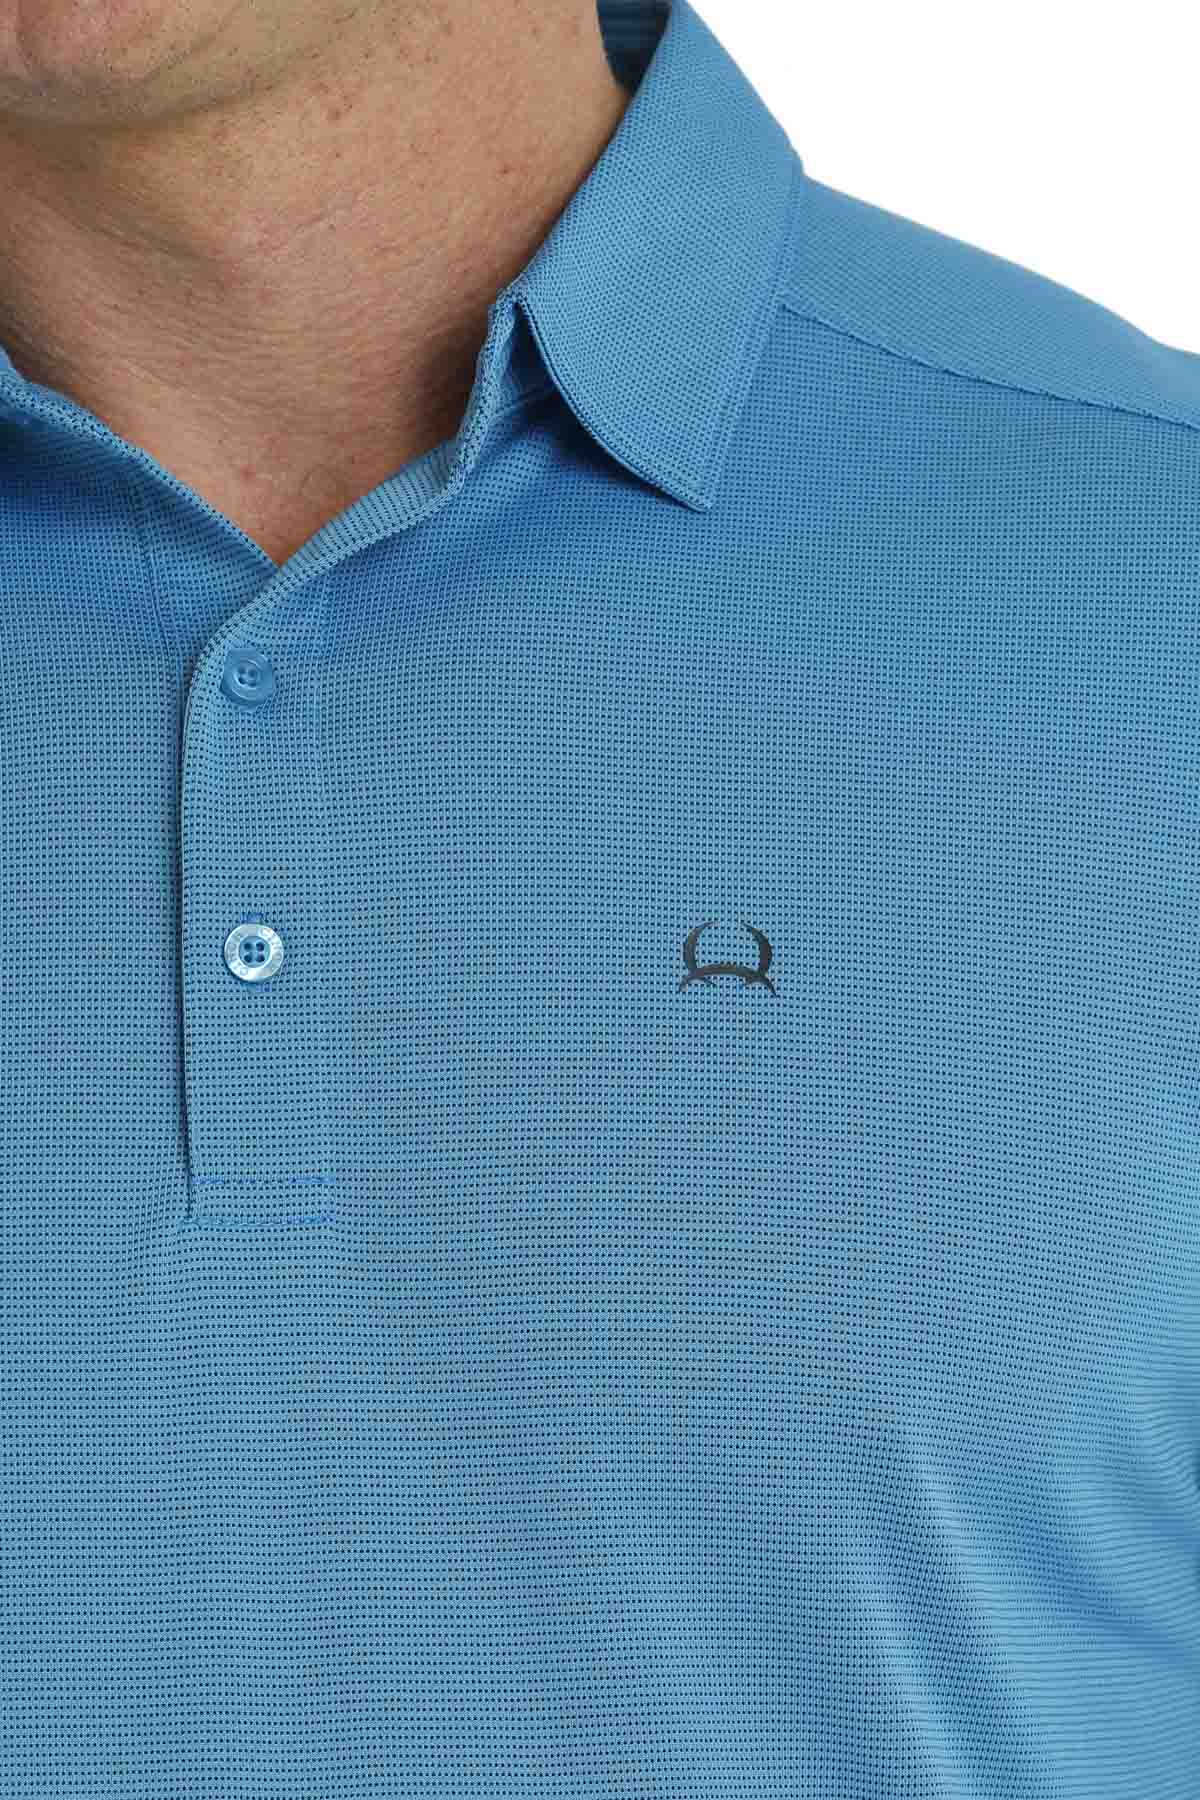 Arenaflex Short Sleeve Polo in Blue by Cinch